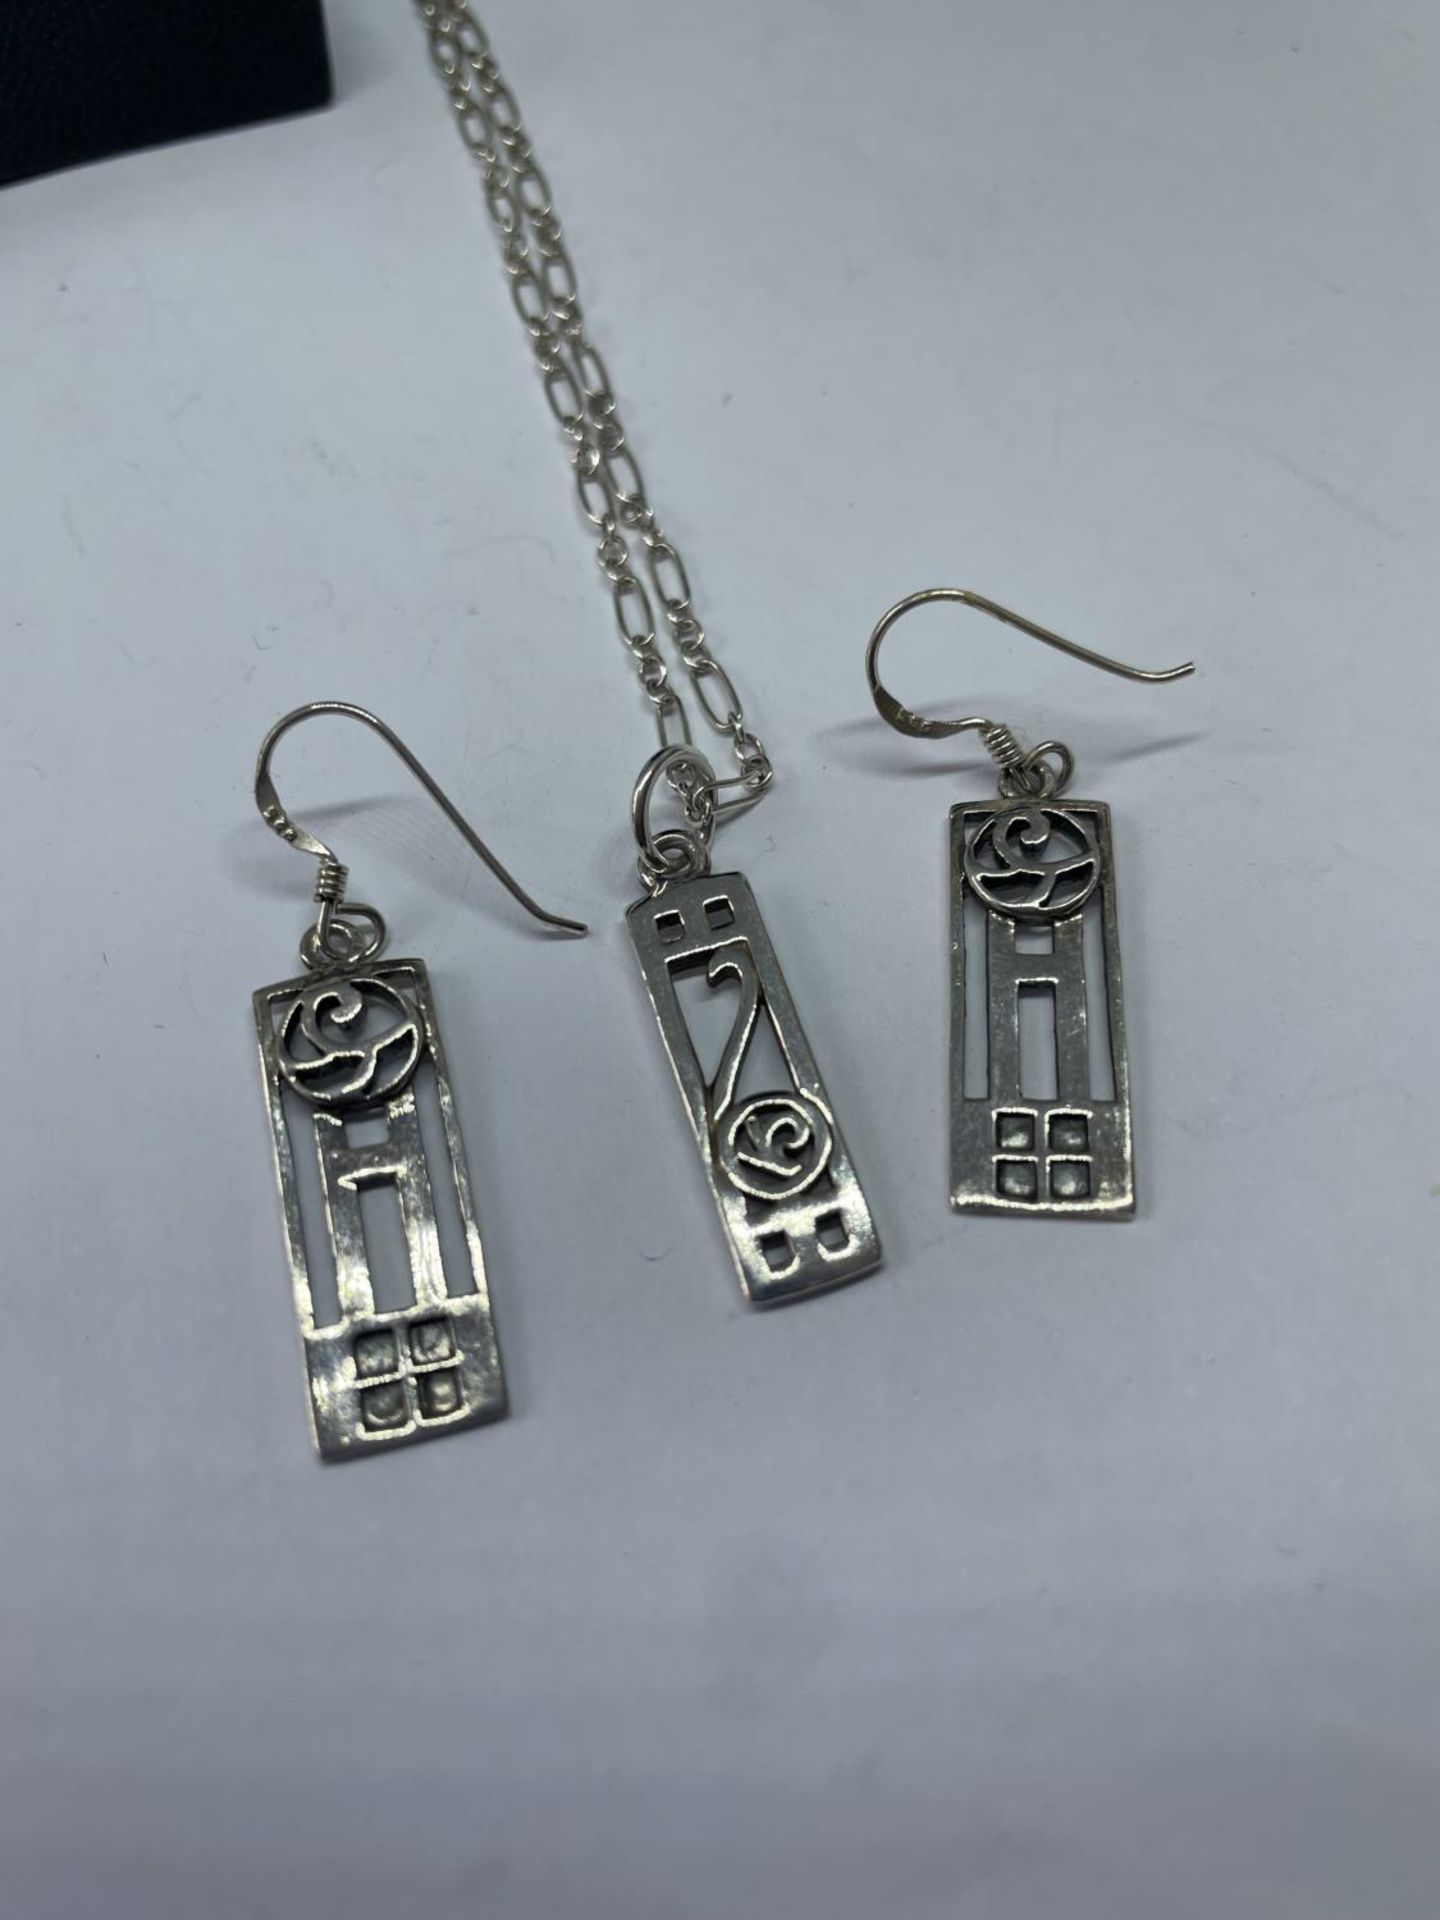 A SILVER MACINTOSH NECKLACE AND EARRINGS SET WITH A PRESENTATION BOX - Image 2 of 3